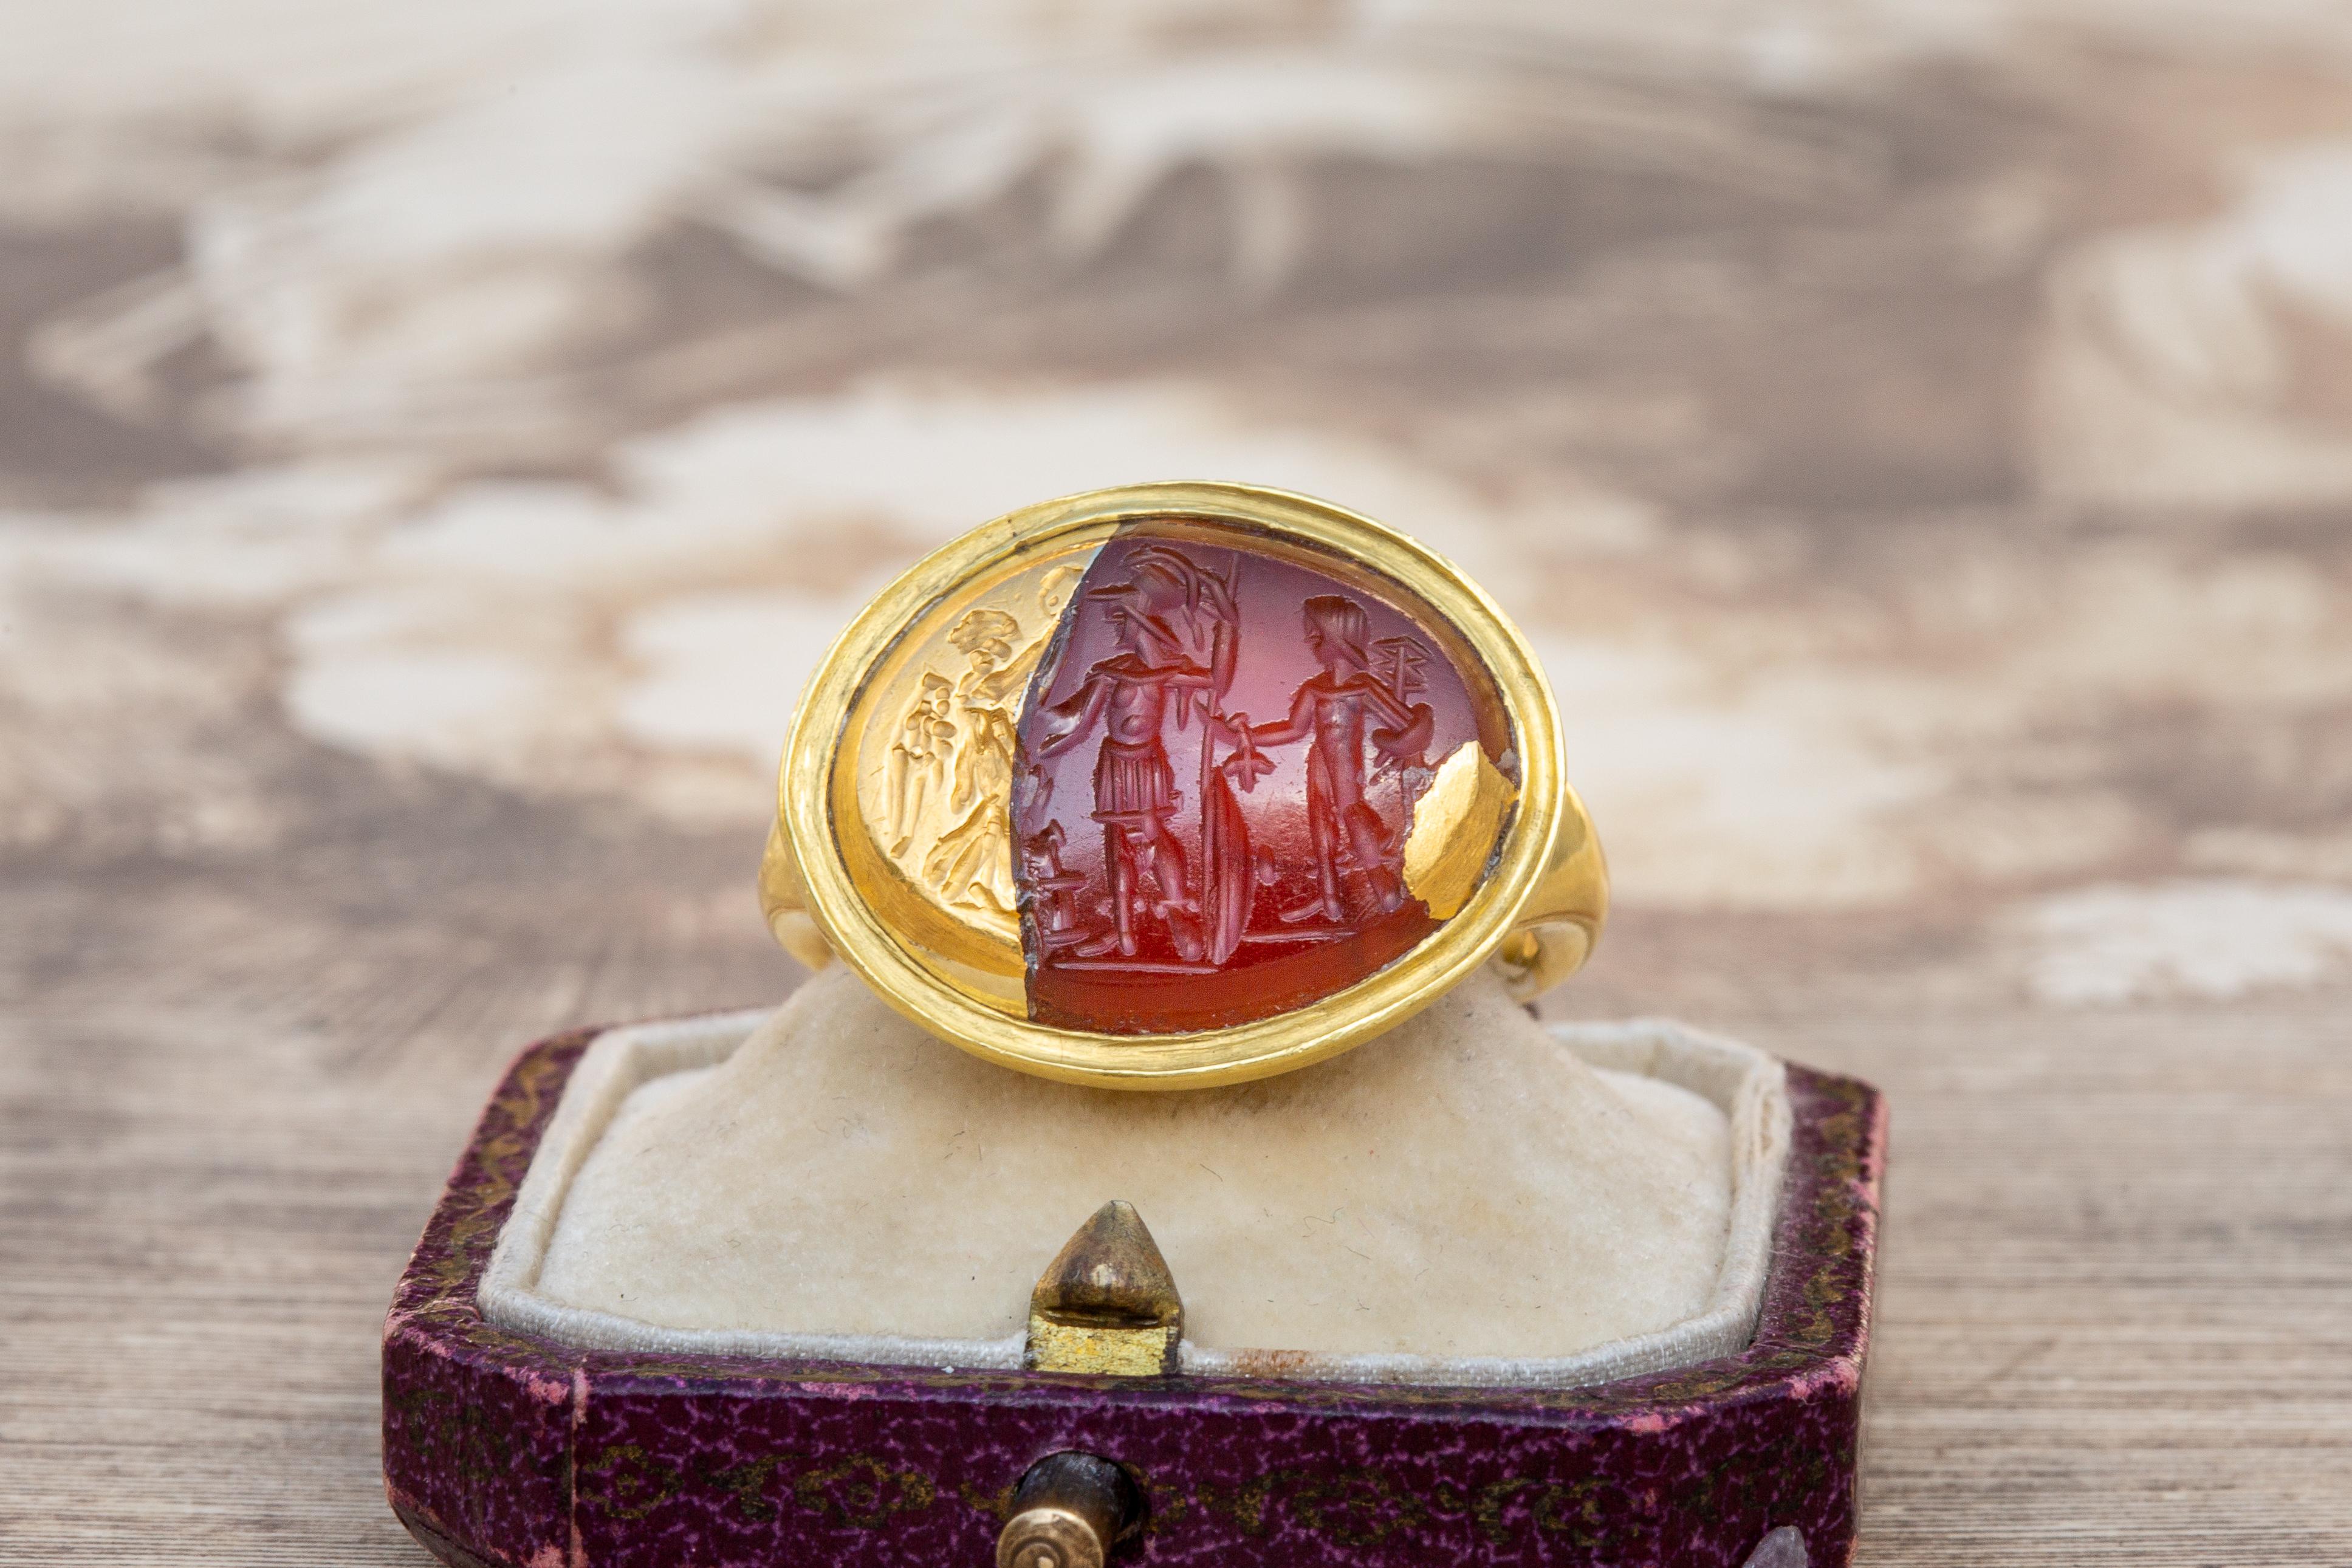 A superb, heavy high karat gold signet ring set with an ancient Roman intaglio, circa 1st century AD. The carved carnelian agate stone depicts two soldiers or warriors stood before a winged deity, most probably Nike, the Roman goddess of victory.